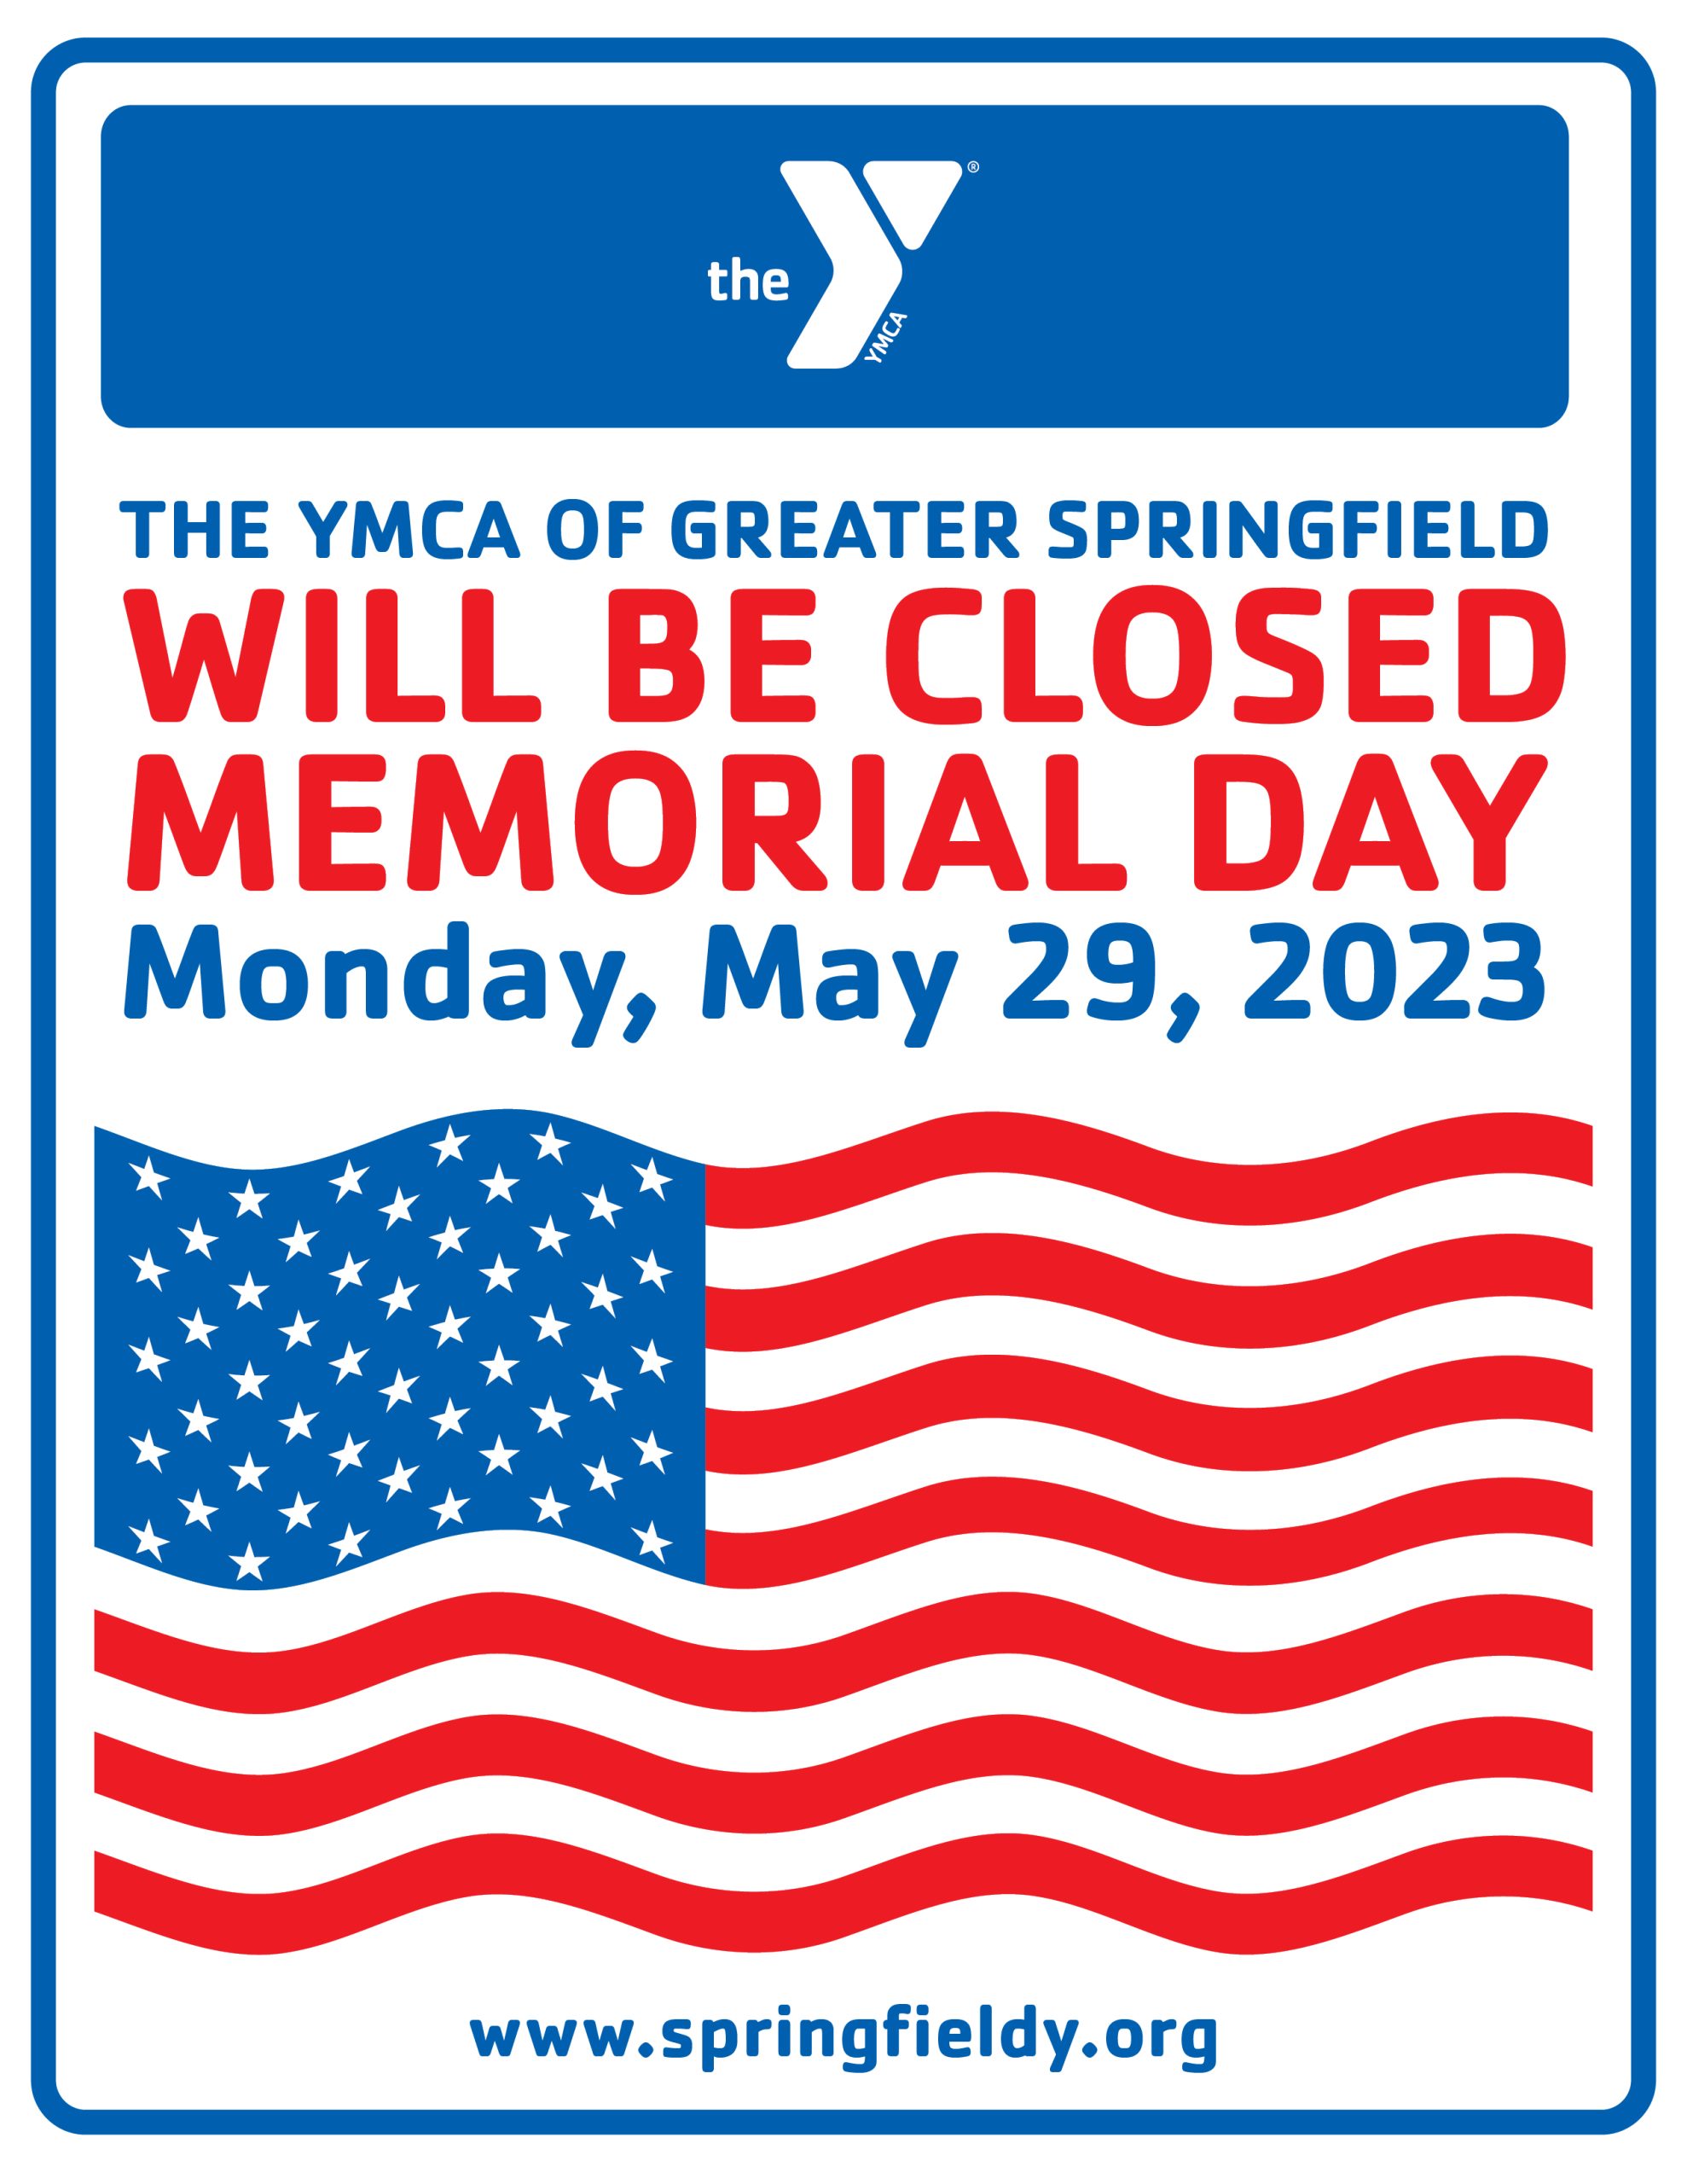 The YMCA of Greater Springfield Will Be Closed Memorial Day, Monday